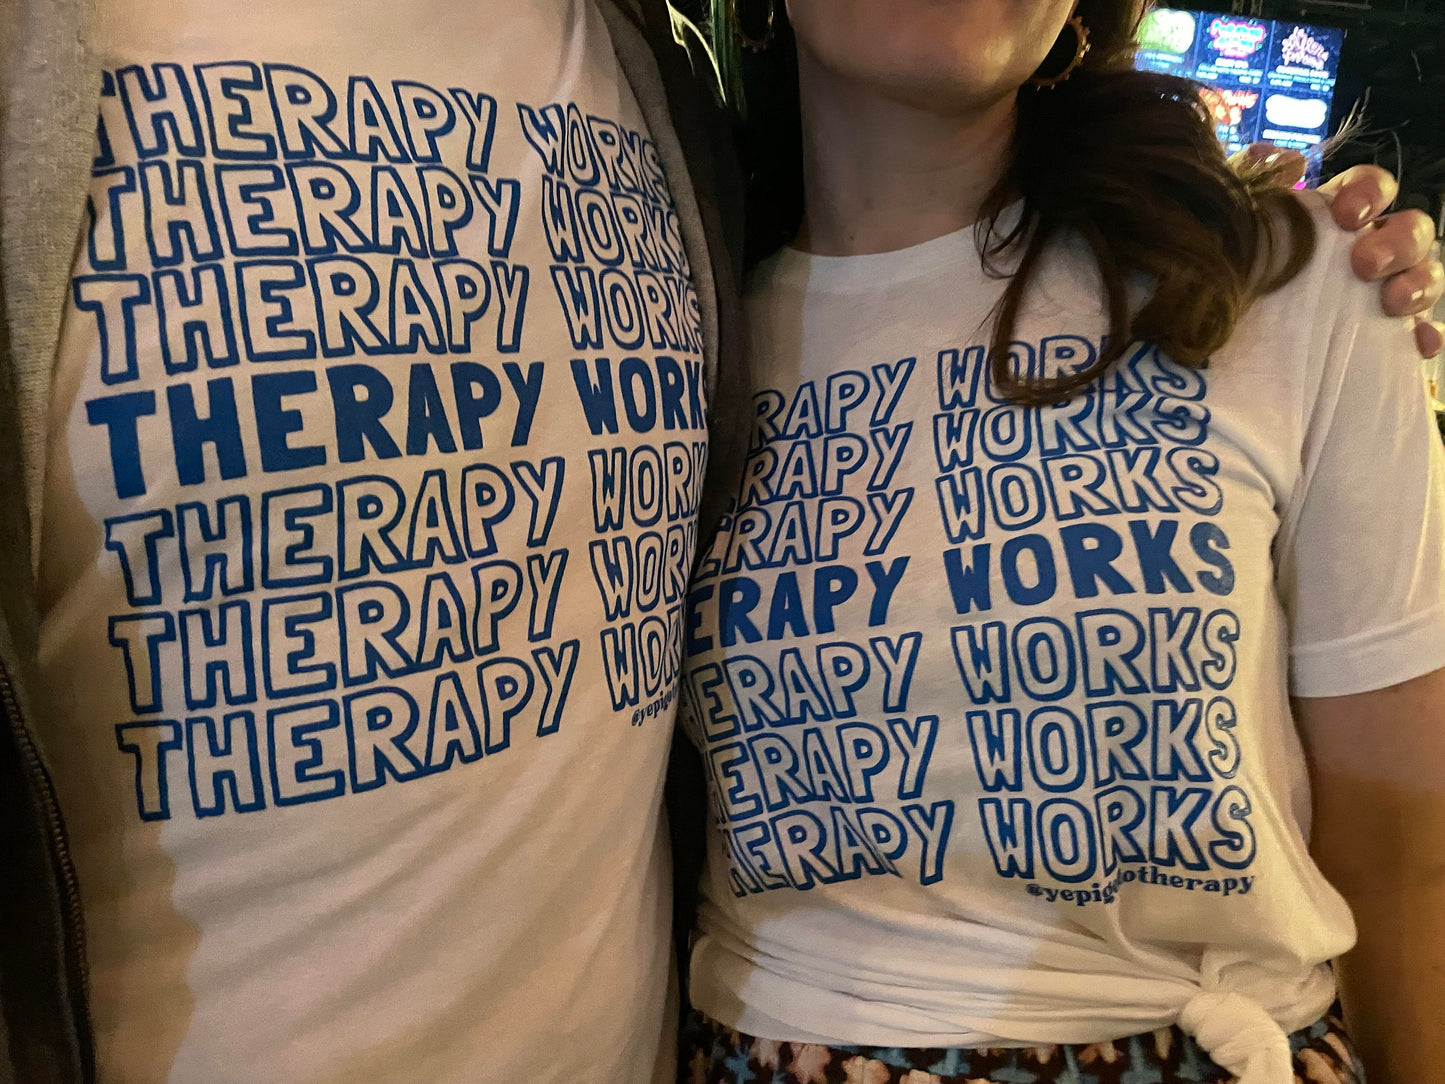 Therapy shirt- Therapy Works